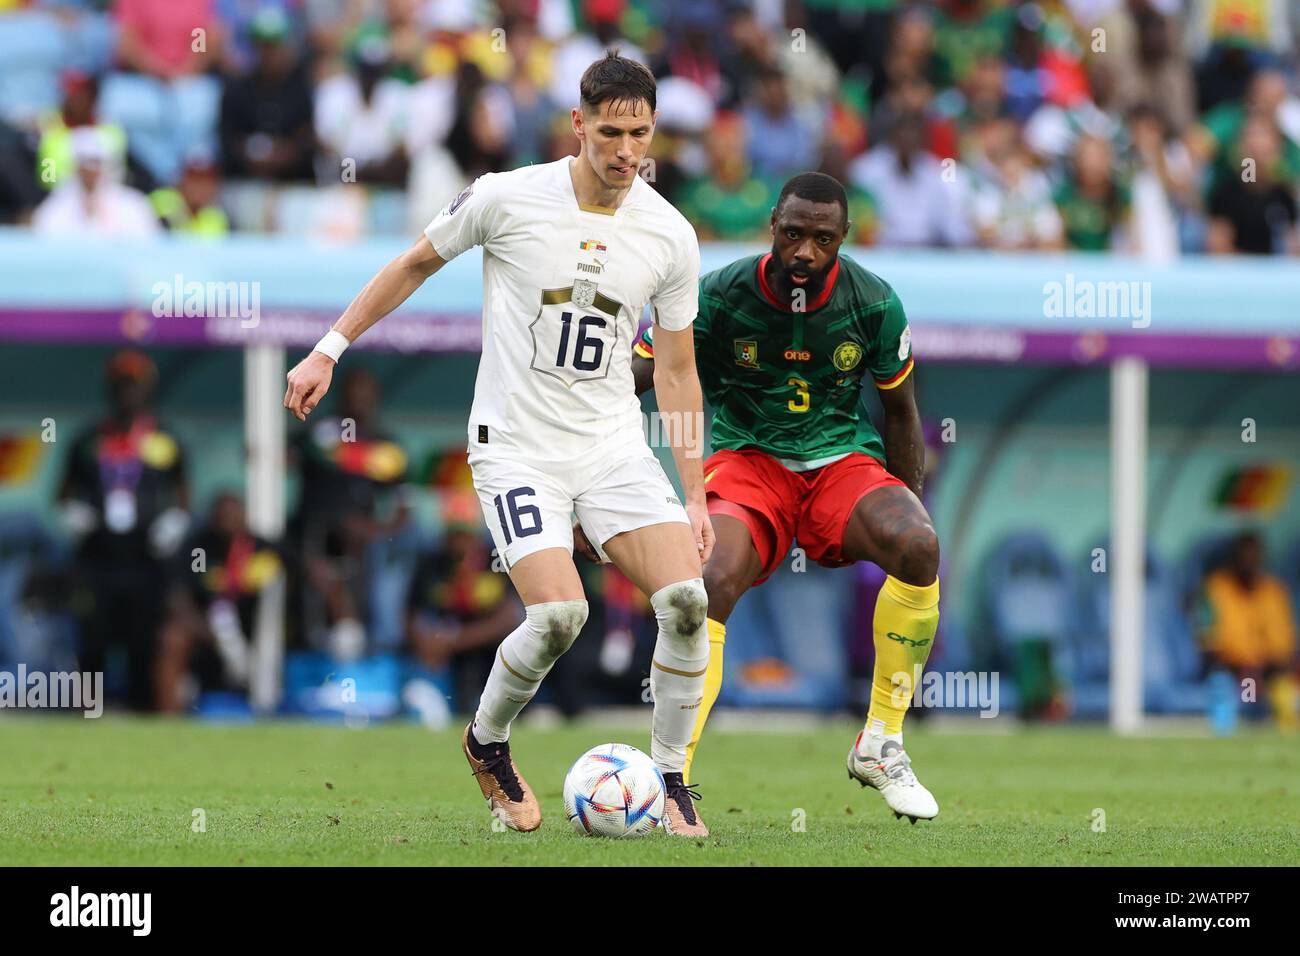 Qatar, Qatar. 28th Nov, 2022. Sasa Lukic of Serbia (L) and Nicolas NKoulou of Cameroon (R) in action during the FIFA World Cup Qatar 2022 match between Cameroon and Serbia at Al Janoub Stadium. Final score: Cameroon 3:3 Serbia. (Photo by Grzegorz Wajda/SOPA Images/Sipa USA) Credit: Sipa USA/Alamy Live News Stock Photo